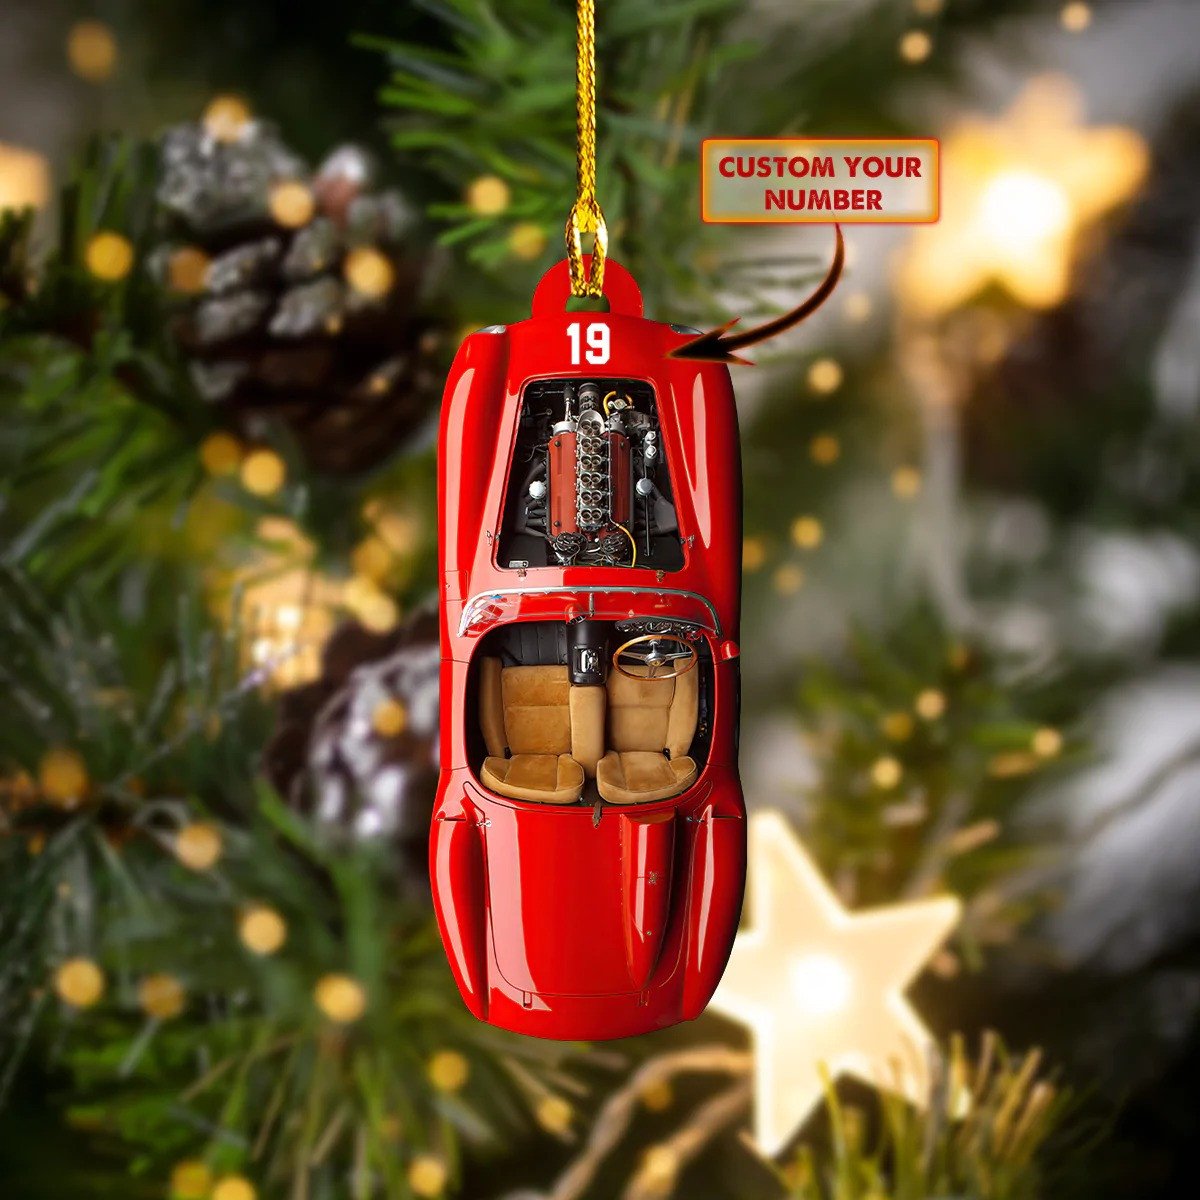 Personalized Drag Racing Red Car Ornament Drag Racing Christmas Tree Ornaments Gift/ Gift for Auto Racing Lover